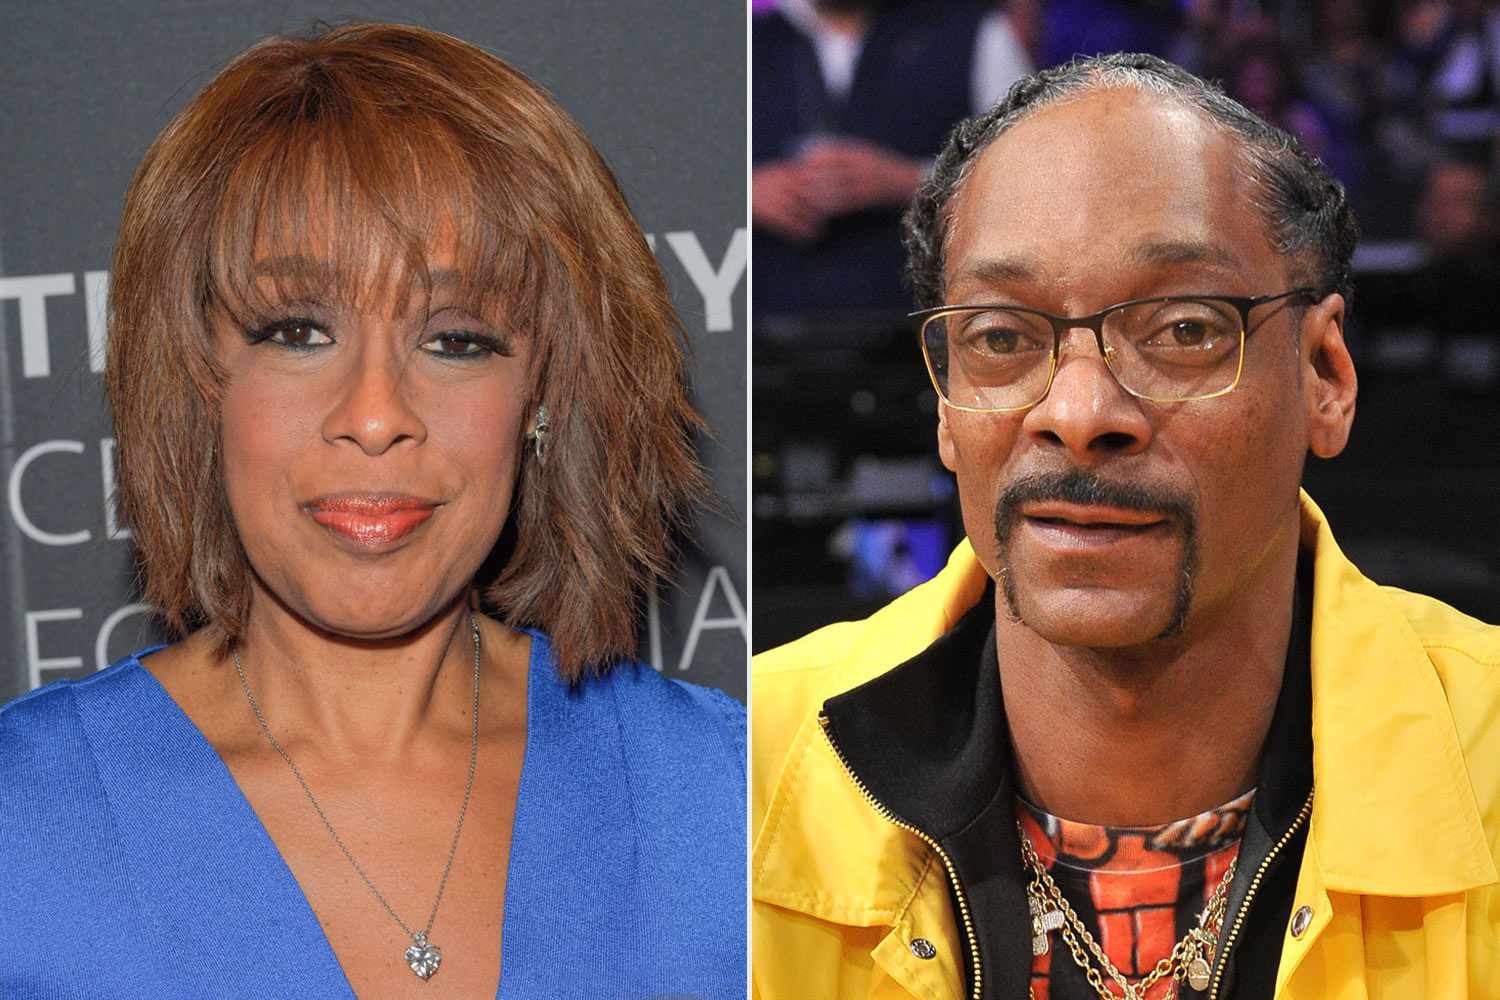 Gayle King and Snoop Dogg